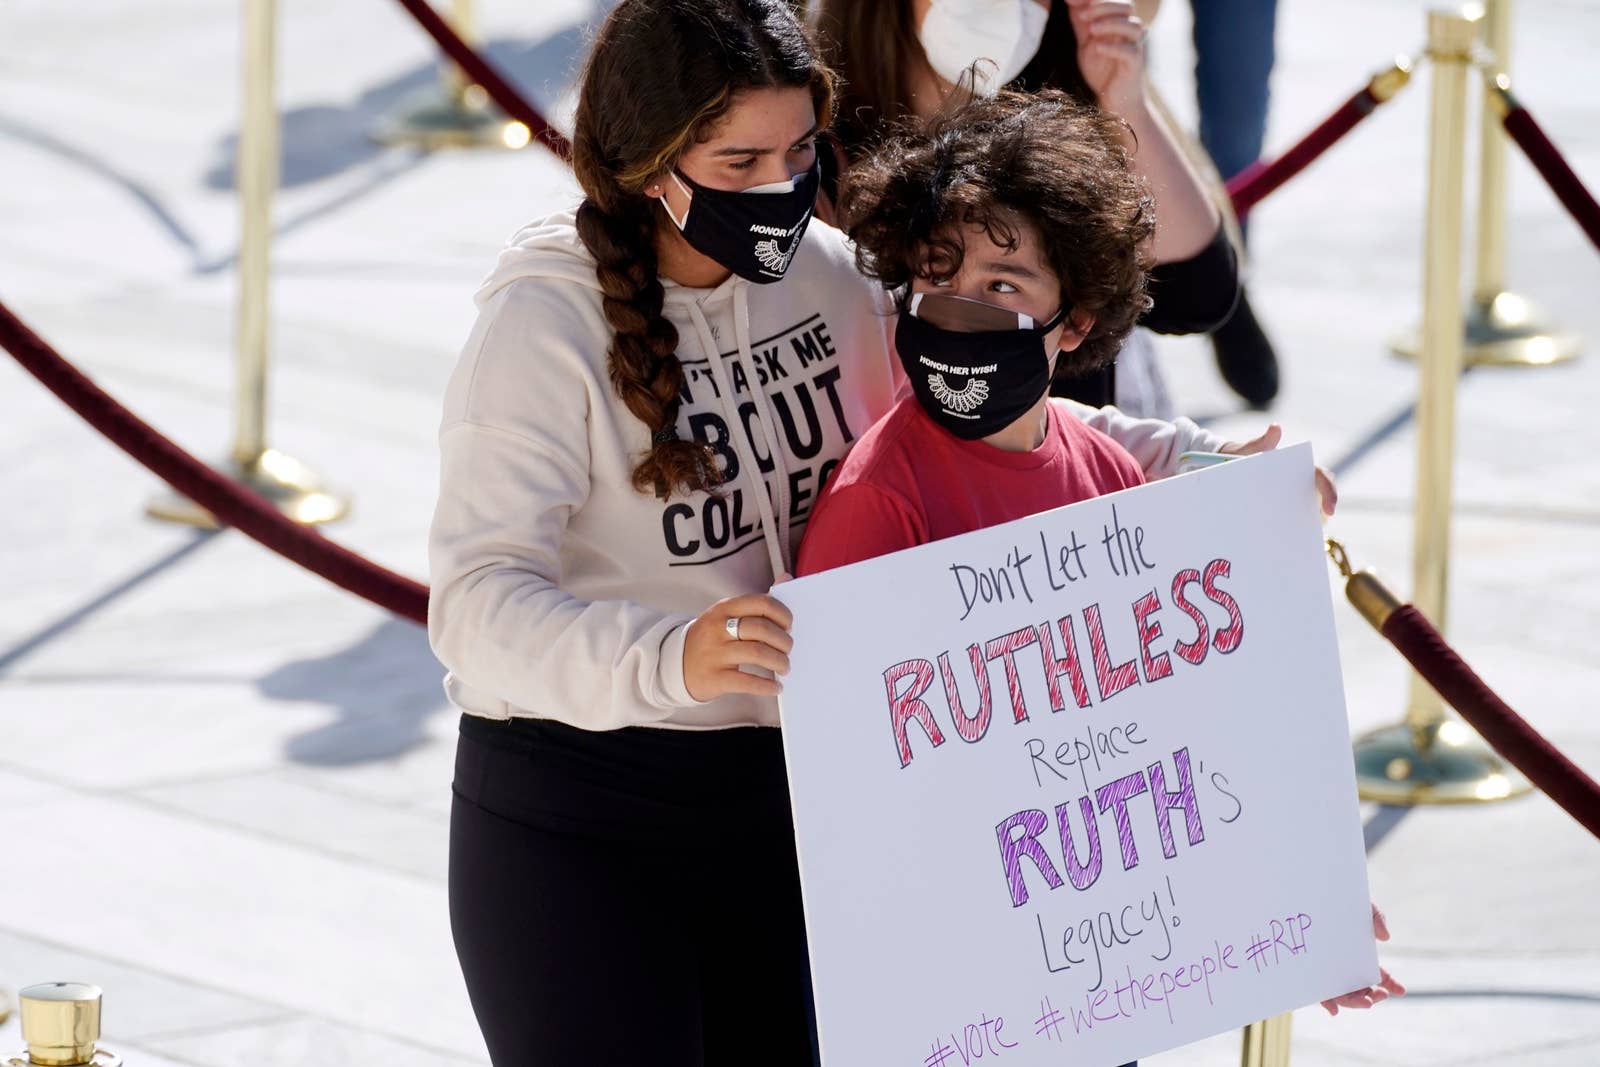 A boy carries a sign that says dont let the ruthless replace ruths legacy